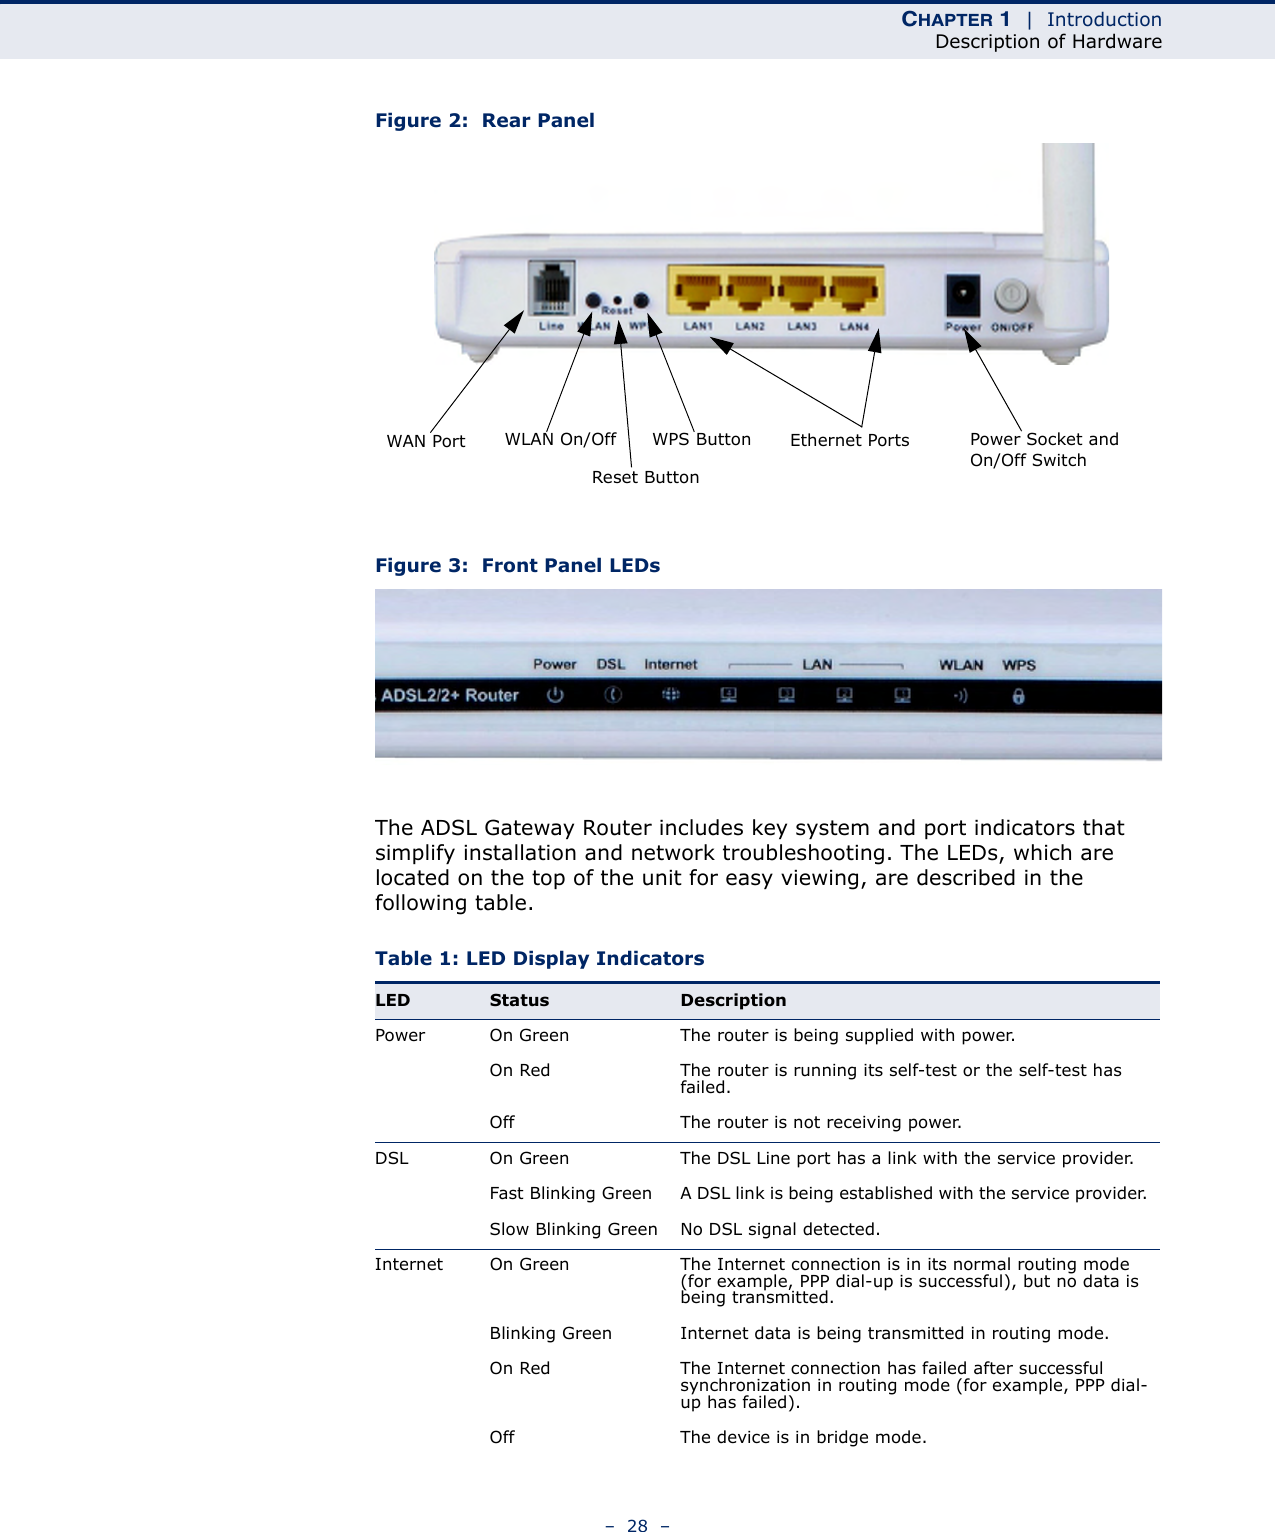 CHAPTER 1  |  IntroductionDescription of Hardware–  28  –Figure 2:  Rear PanelFigure 3:  Front Panel LEDsThe ADSL Gateway Router includes key system and port indicators that simplify installation and network troubleshooting. The LEDs, which are located on the top of the unit for easy viewing, are described in the following table.Table 1: LED Display IndicatorsLED Status DescriptionPower On Green The router is being supplied with power.On Red The router is running its self-test or the self-test has failed.Off The router is not receiving power.DSL On Green The DSL Line port has a link with the service provider.Fast Blinking Green A DSL link is being established with the service provider.Slow Blinking Green No DSL signal detected.Internet On Green The Internet connection is in its normal routing mode (for example, PPP dial-up is successful), but no data is being transmitted.Blinking Green Internet data is being transmitted in routing mode.On Red The Internet connection has failed after successful synchronization in routing mode (for example, PPP dial-up has failed).Off The device is in bridge mode.WAN Port Power Socket and On/Off SwitchWLAN On/Off Ethernet PortsReset ButtonWPS Button